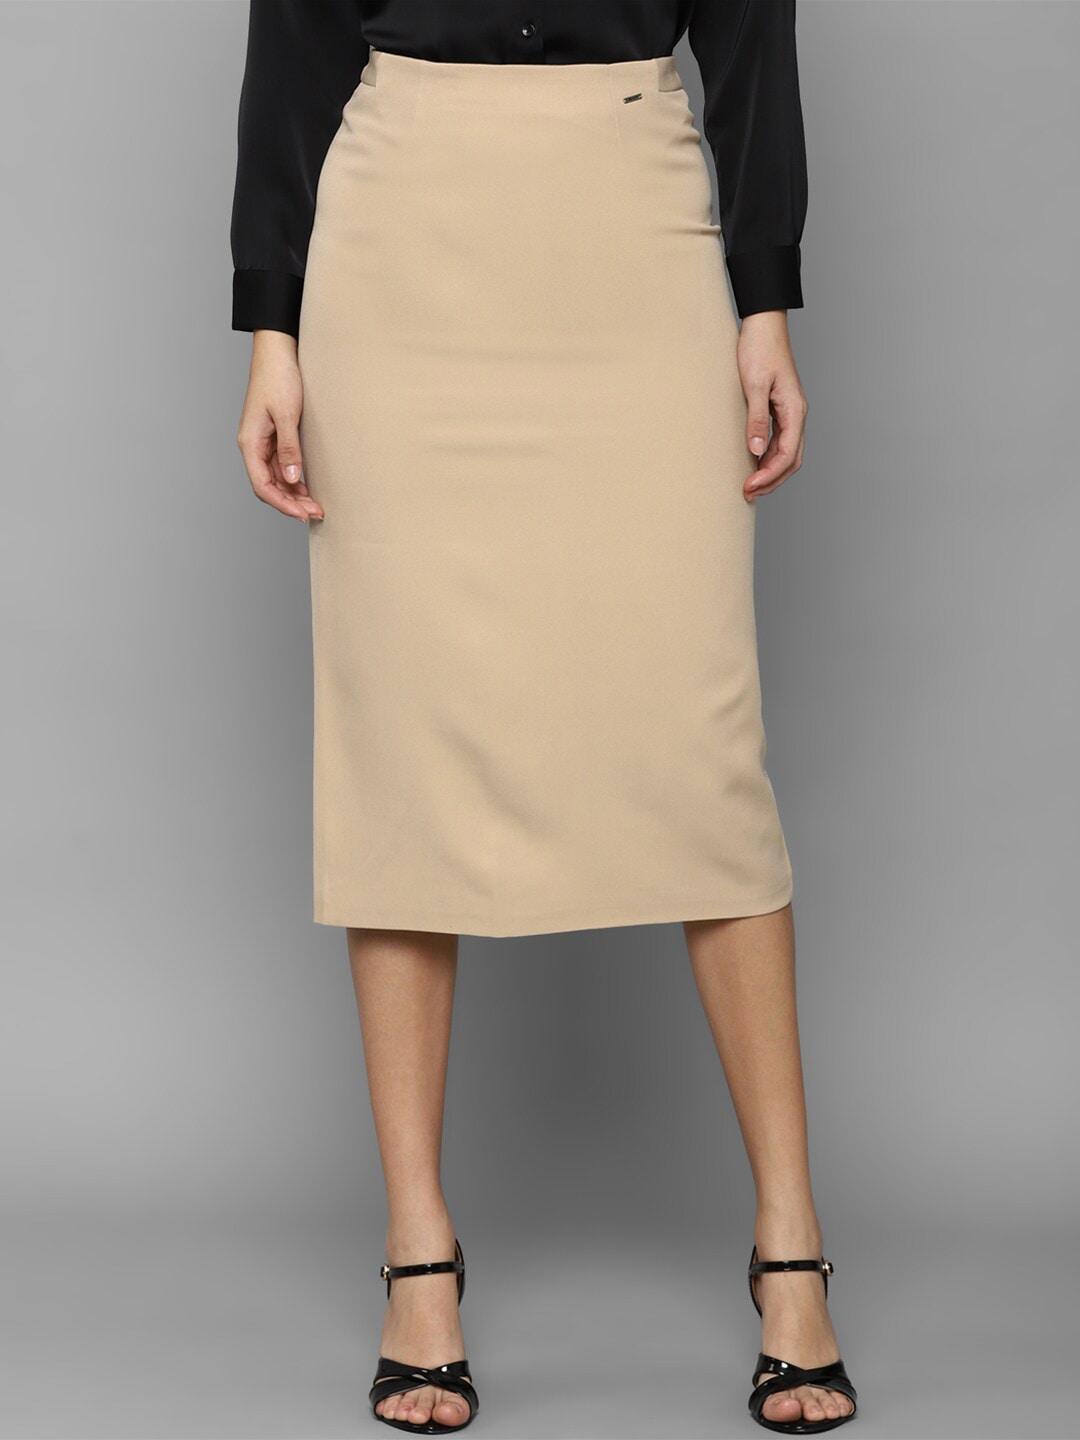 Allen Solly Woman Khaki Solid Pencil Skirts